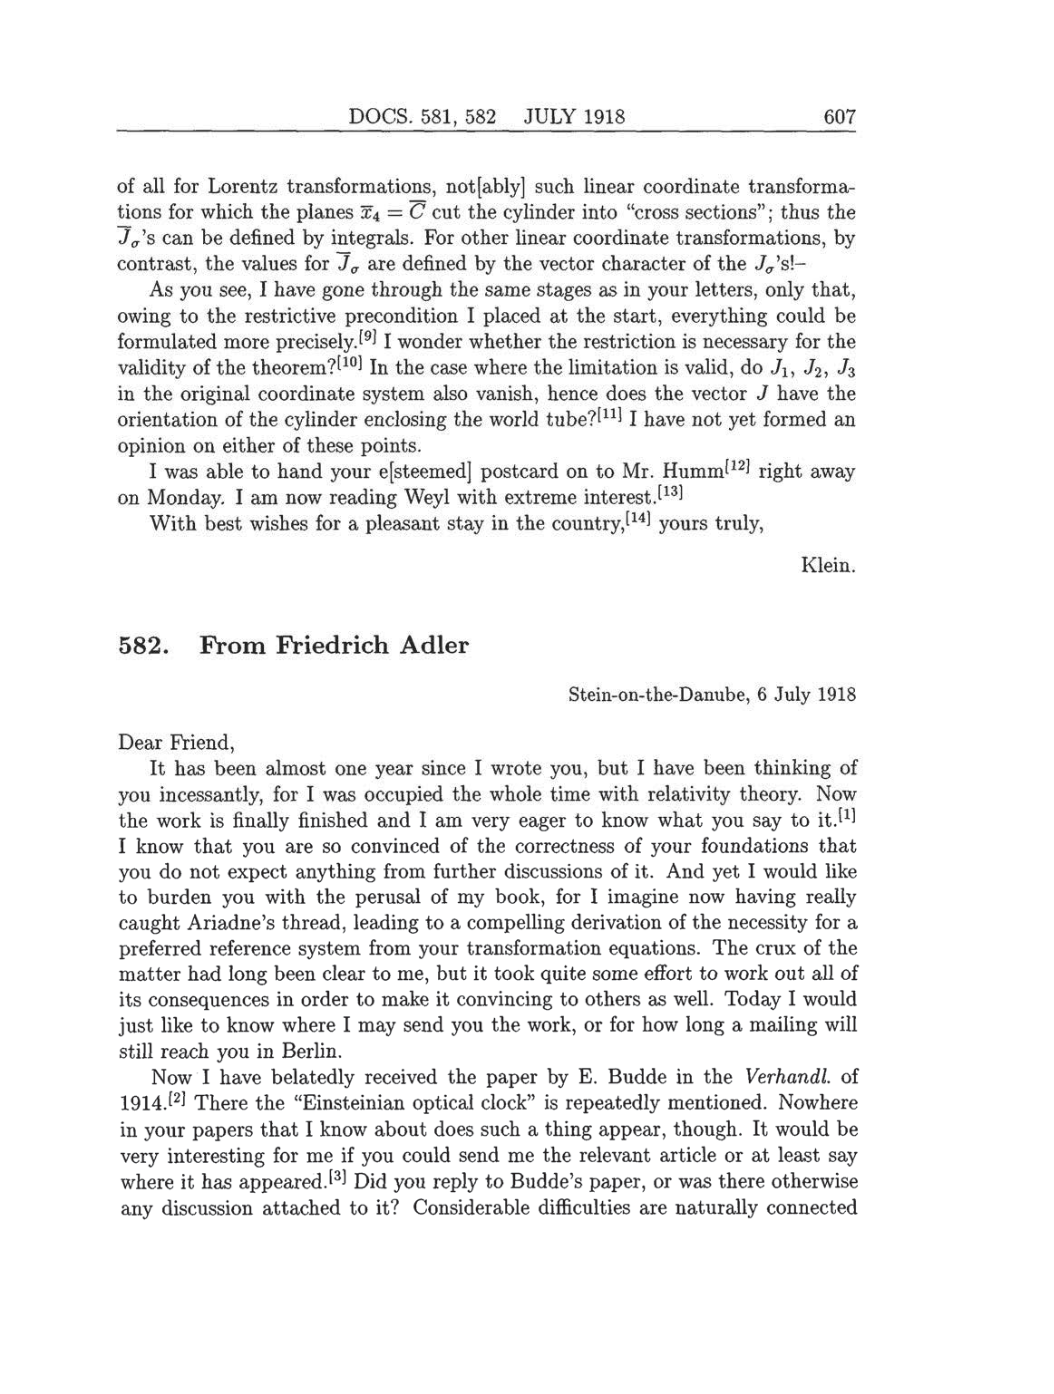 Volume 8: The Berlin Years: Correspondence, 1914-1918 (English translation supplement) page 607